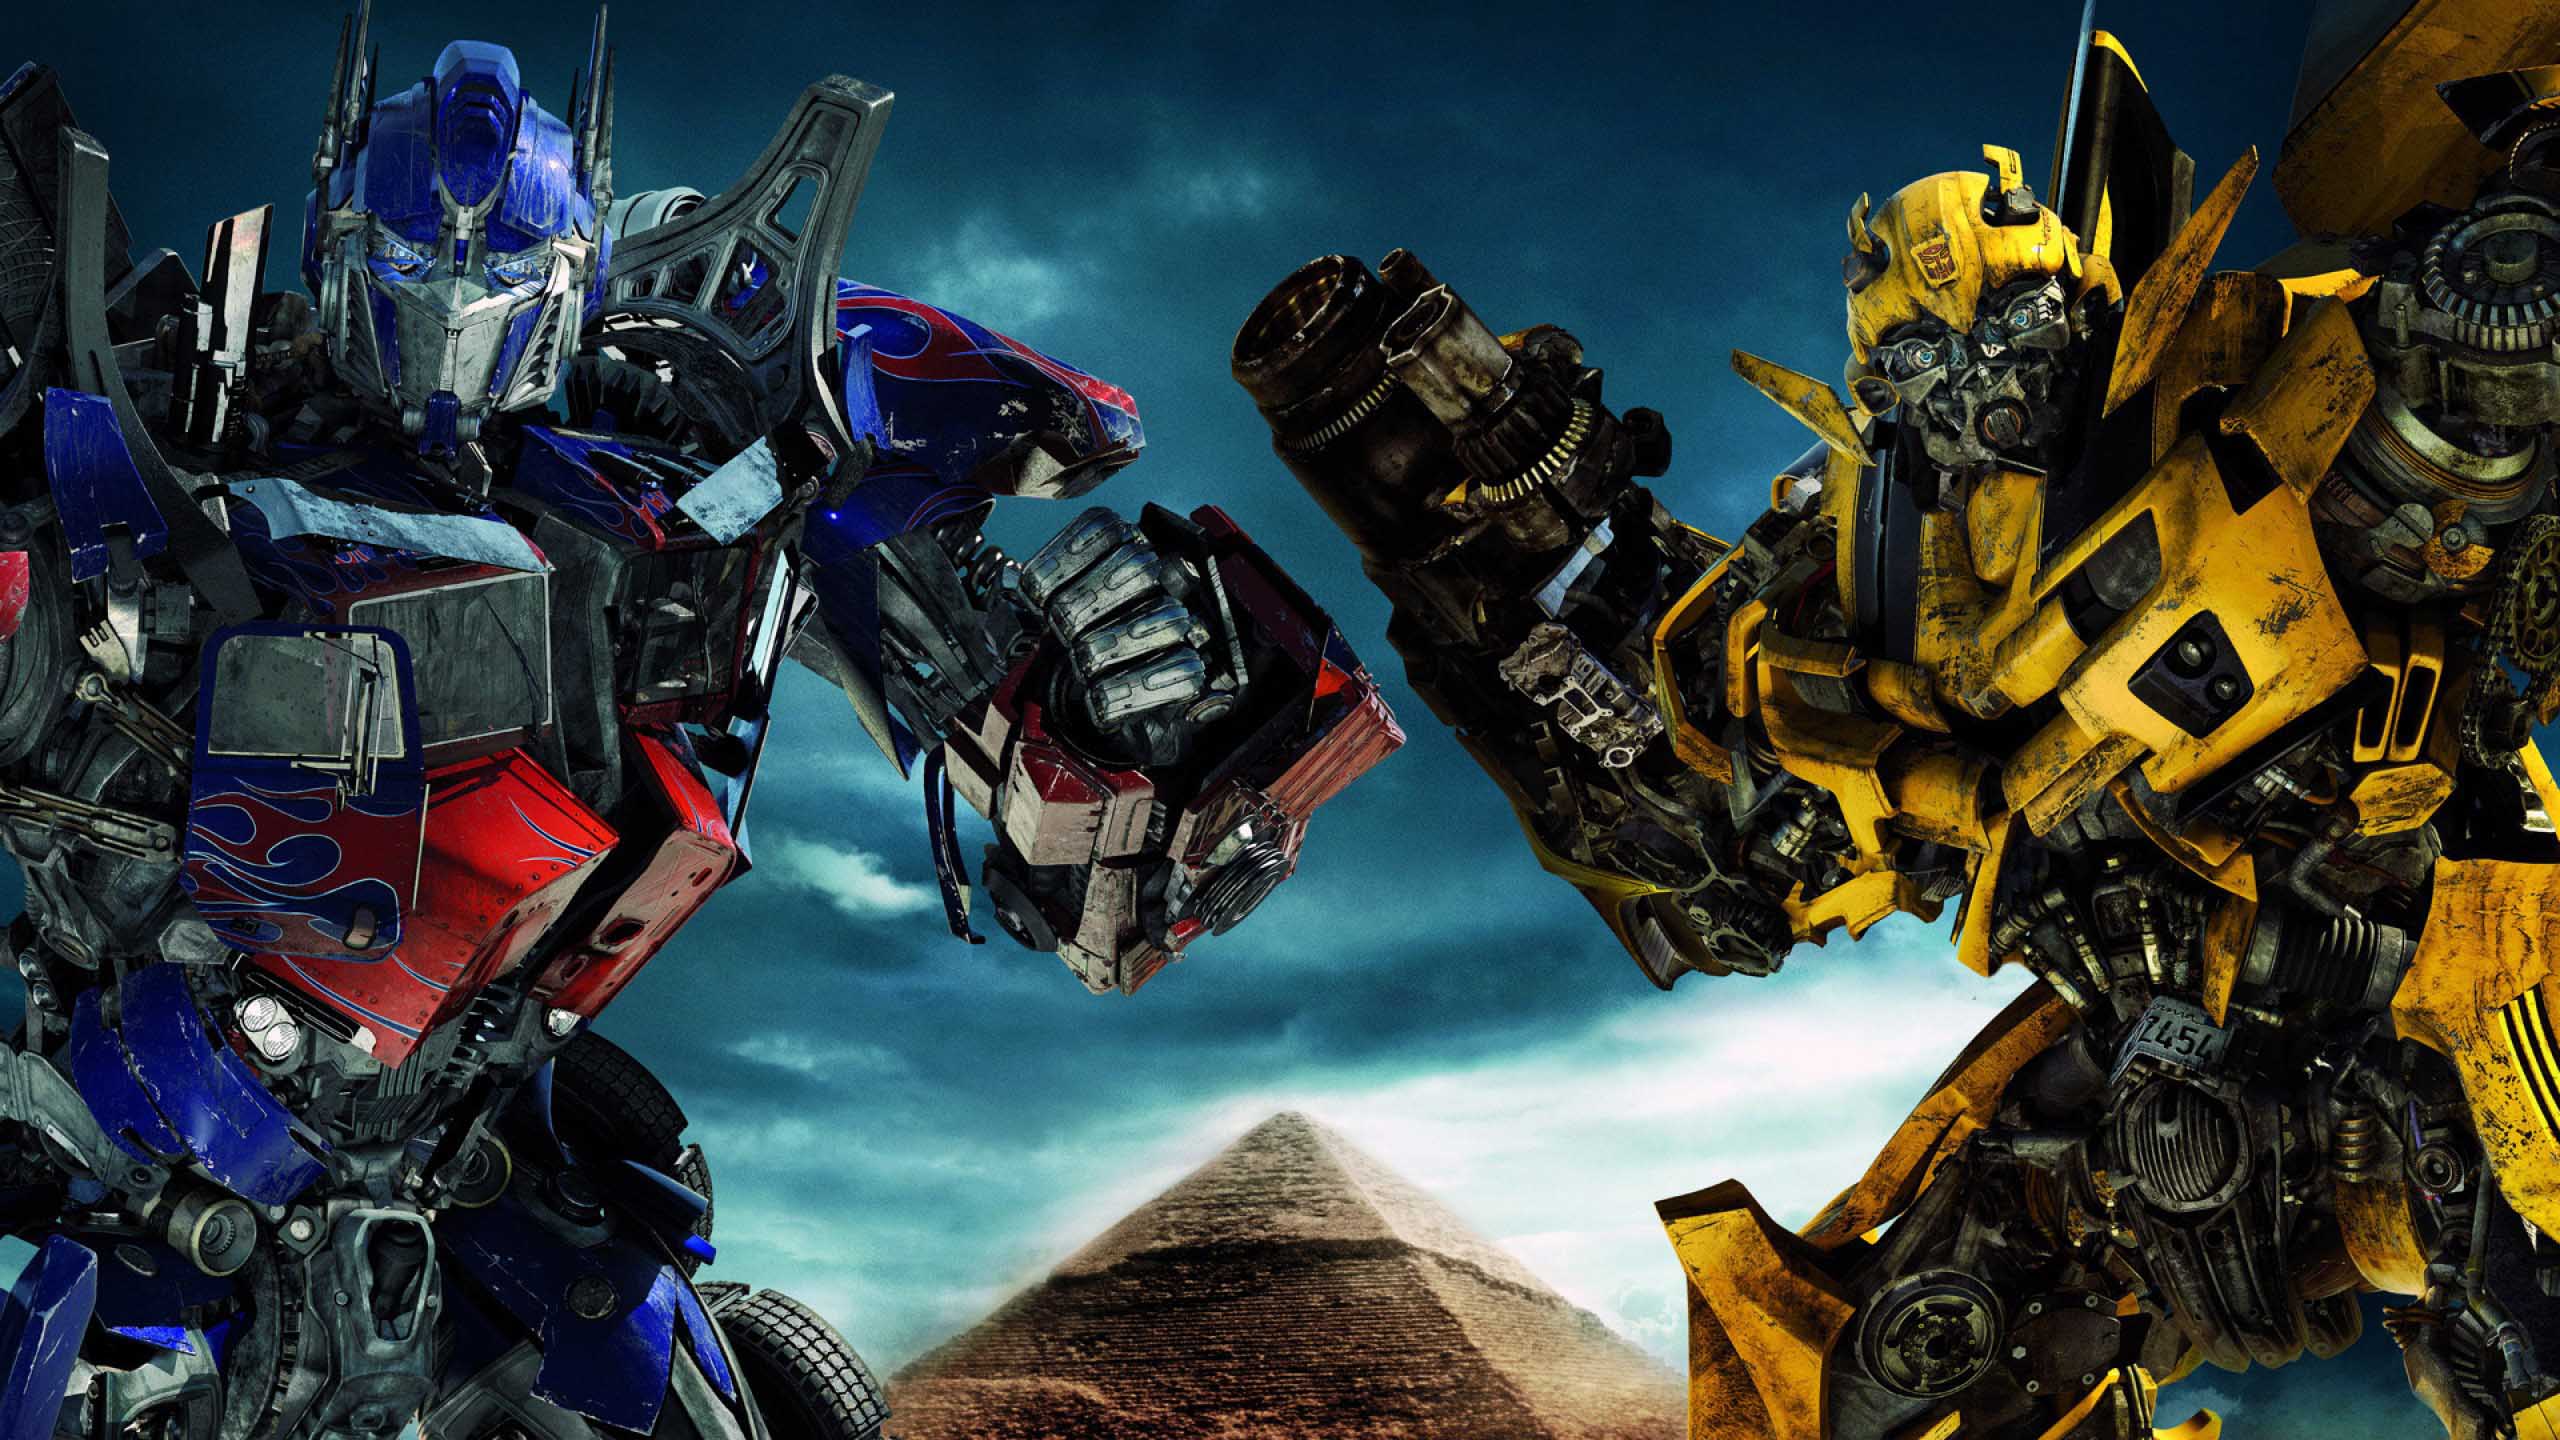 Movie Wallpaper: Transformers Optimus Prime Wallpapers Picture HD ...